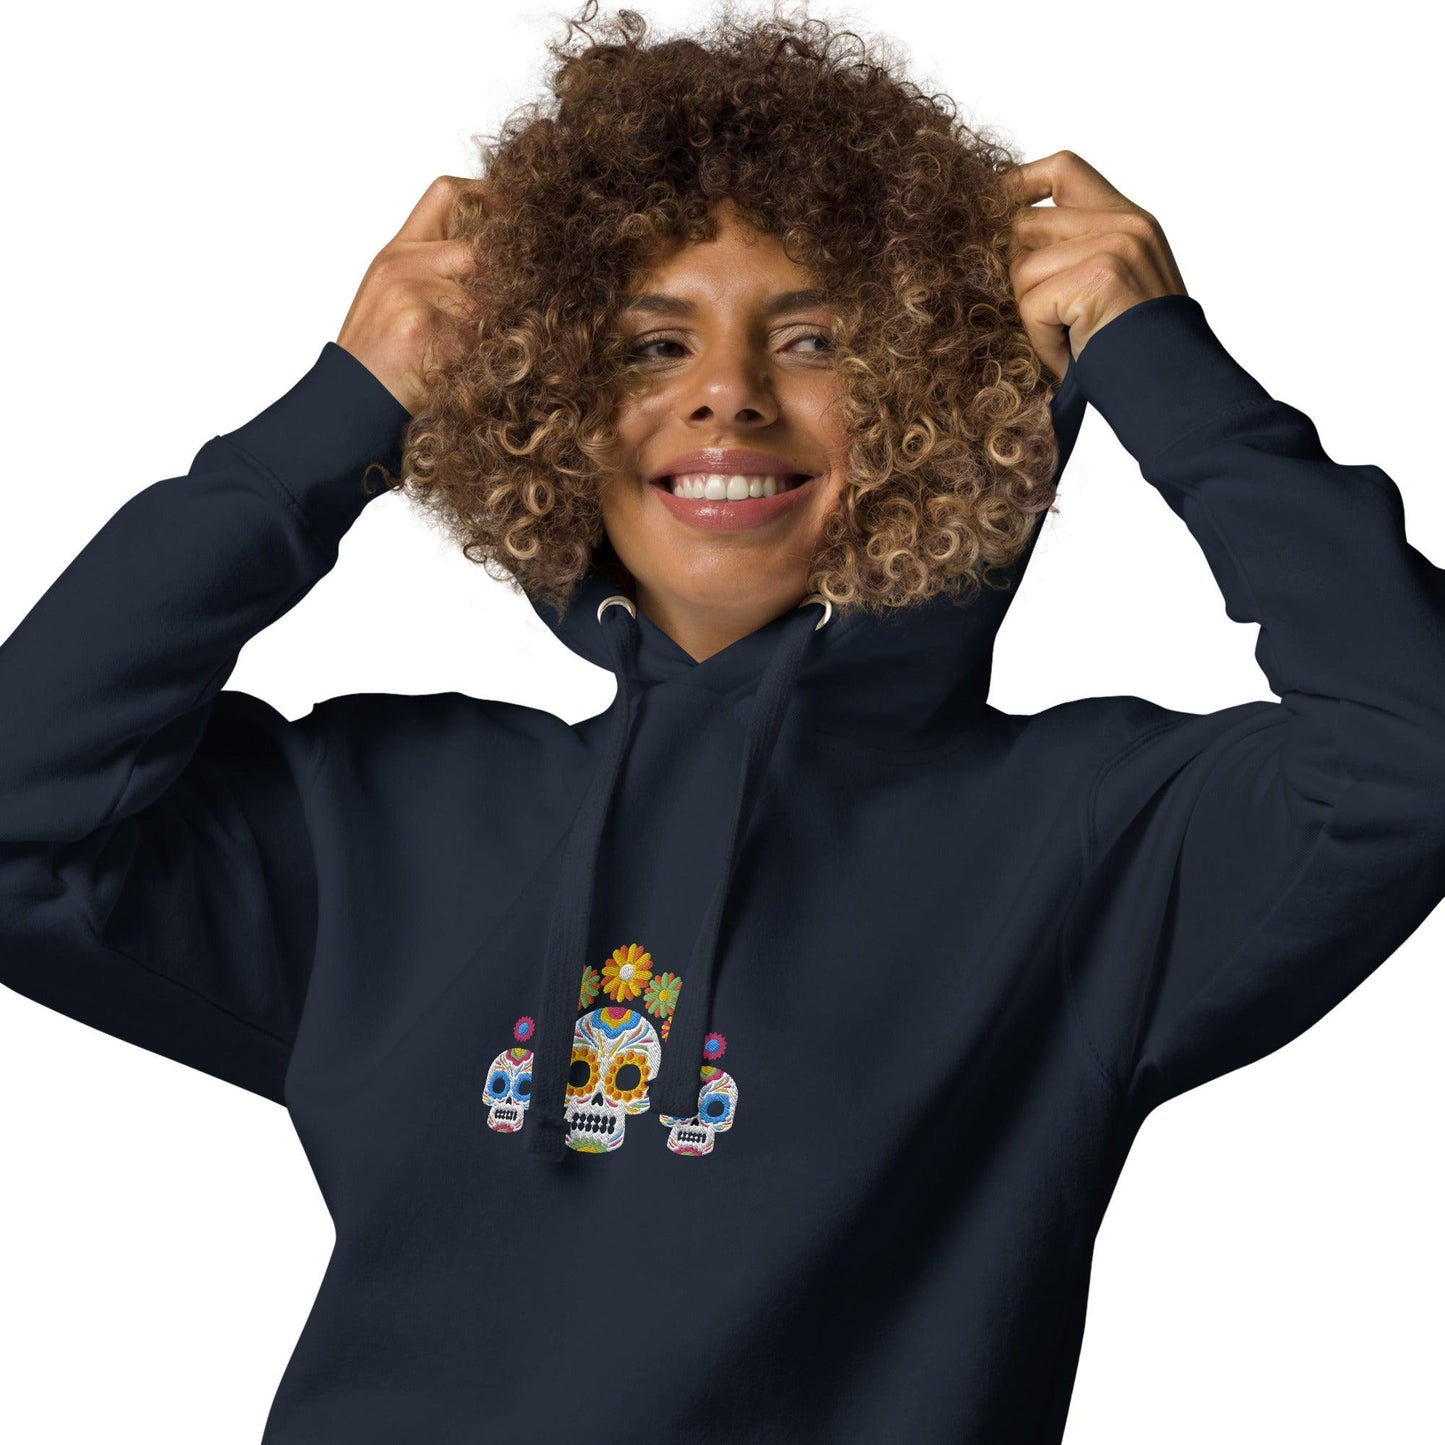 Mexican Day of the Dead Embroidered Hoodie - The Global Wanderer